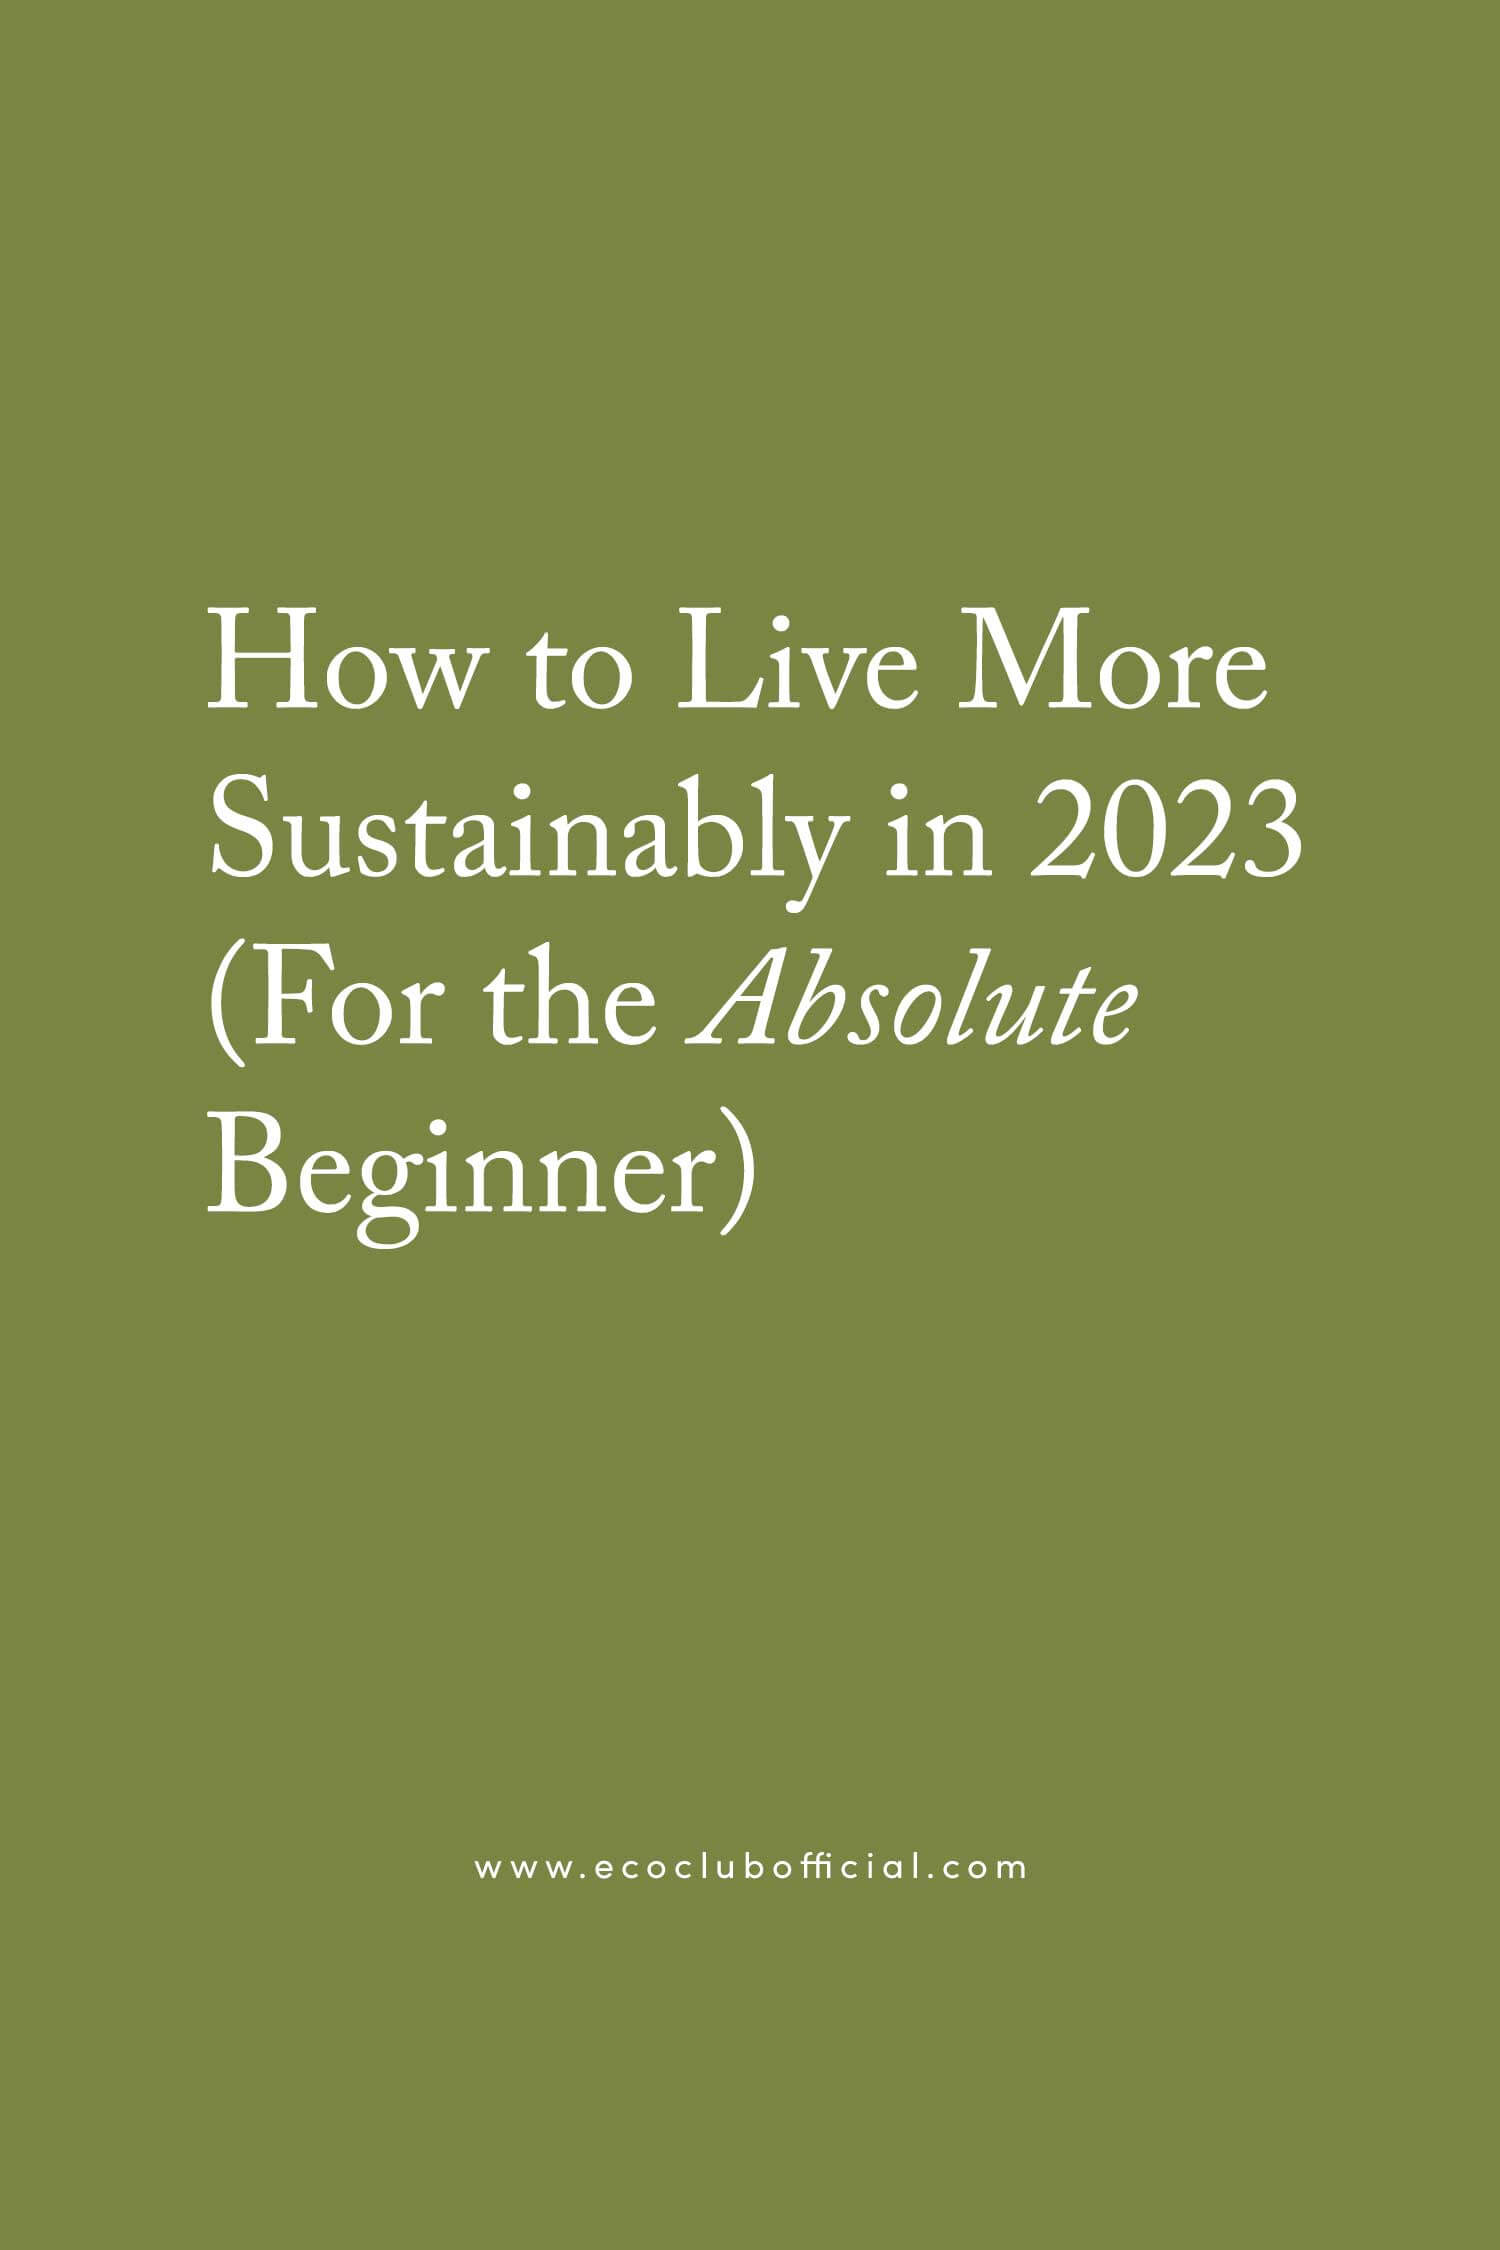 How to Live More Sustainably in 2023 (For The Absolute Beginner)